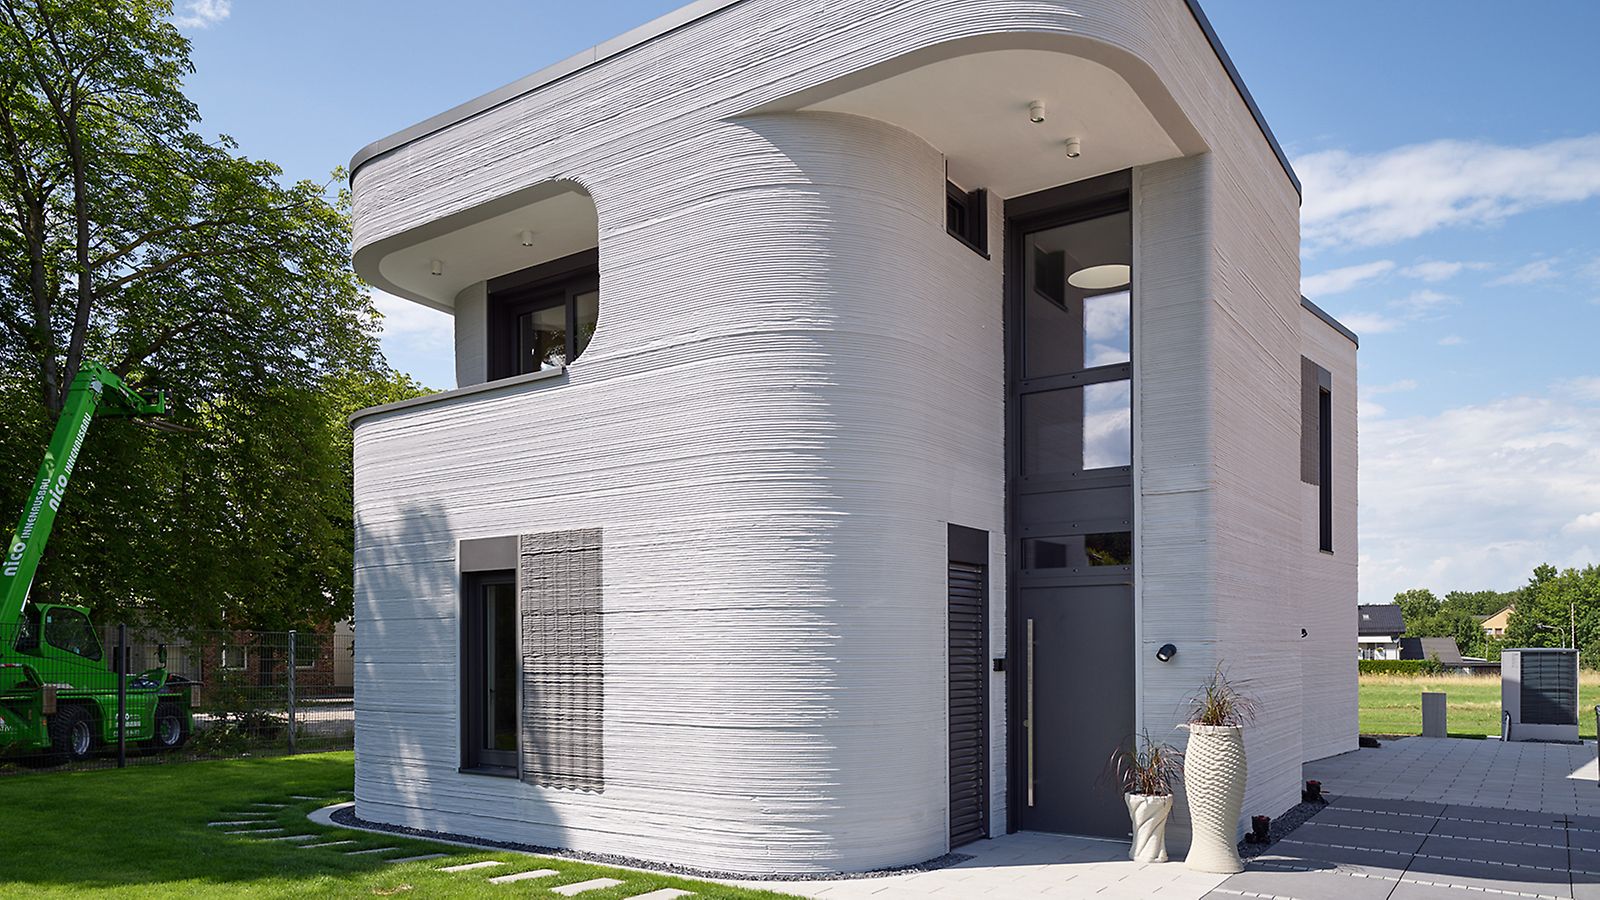 Germany's first 3D-printed house opens - 1627494651 29jul21 Peri 3DprinteDhouse Beckum